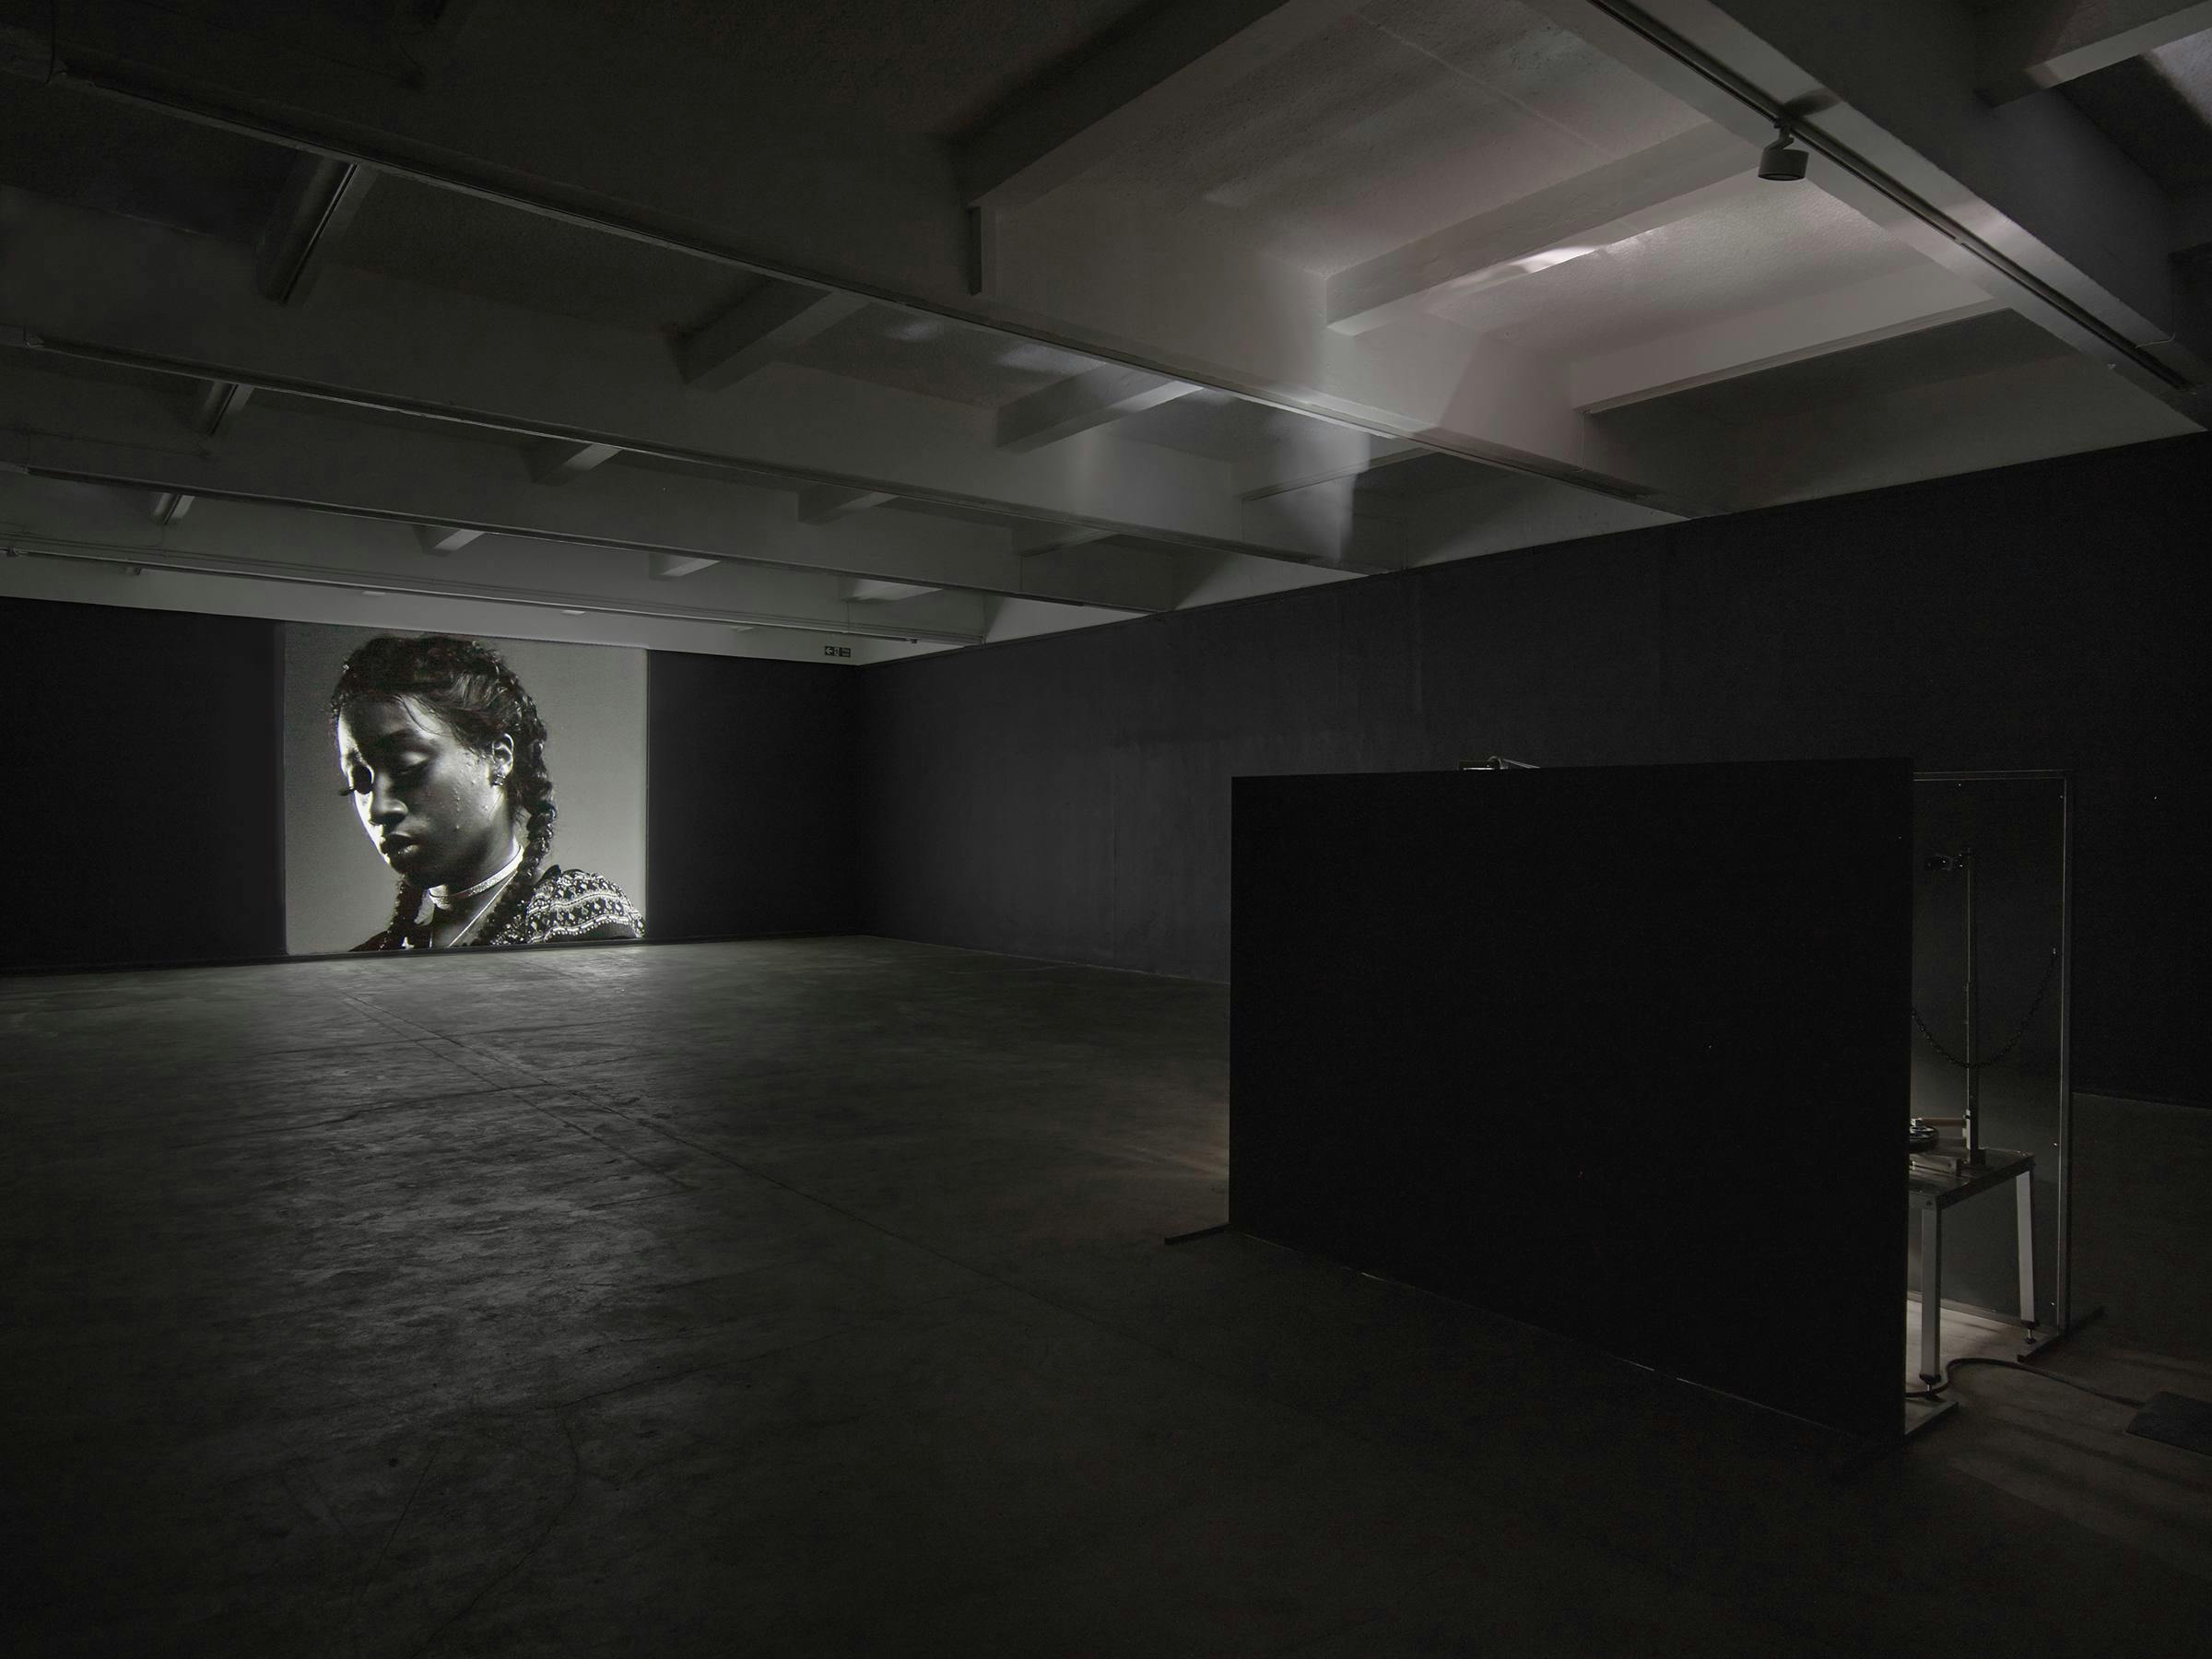 A video art work projected in a darkened space. The projected image is black and white and depicts a black woman wearing glasses and a white shirt at a 3 quarter length profile. We can see the projection box in the foreground.